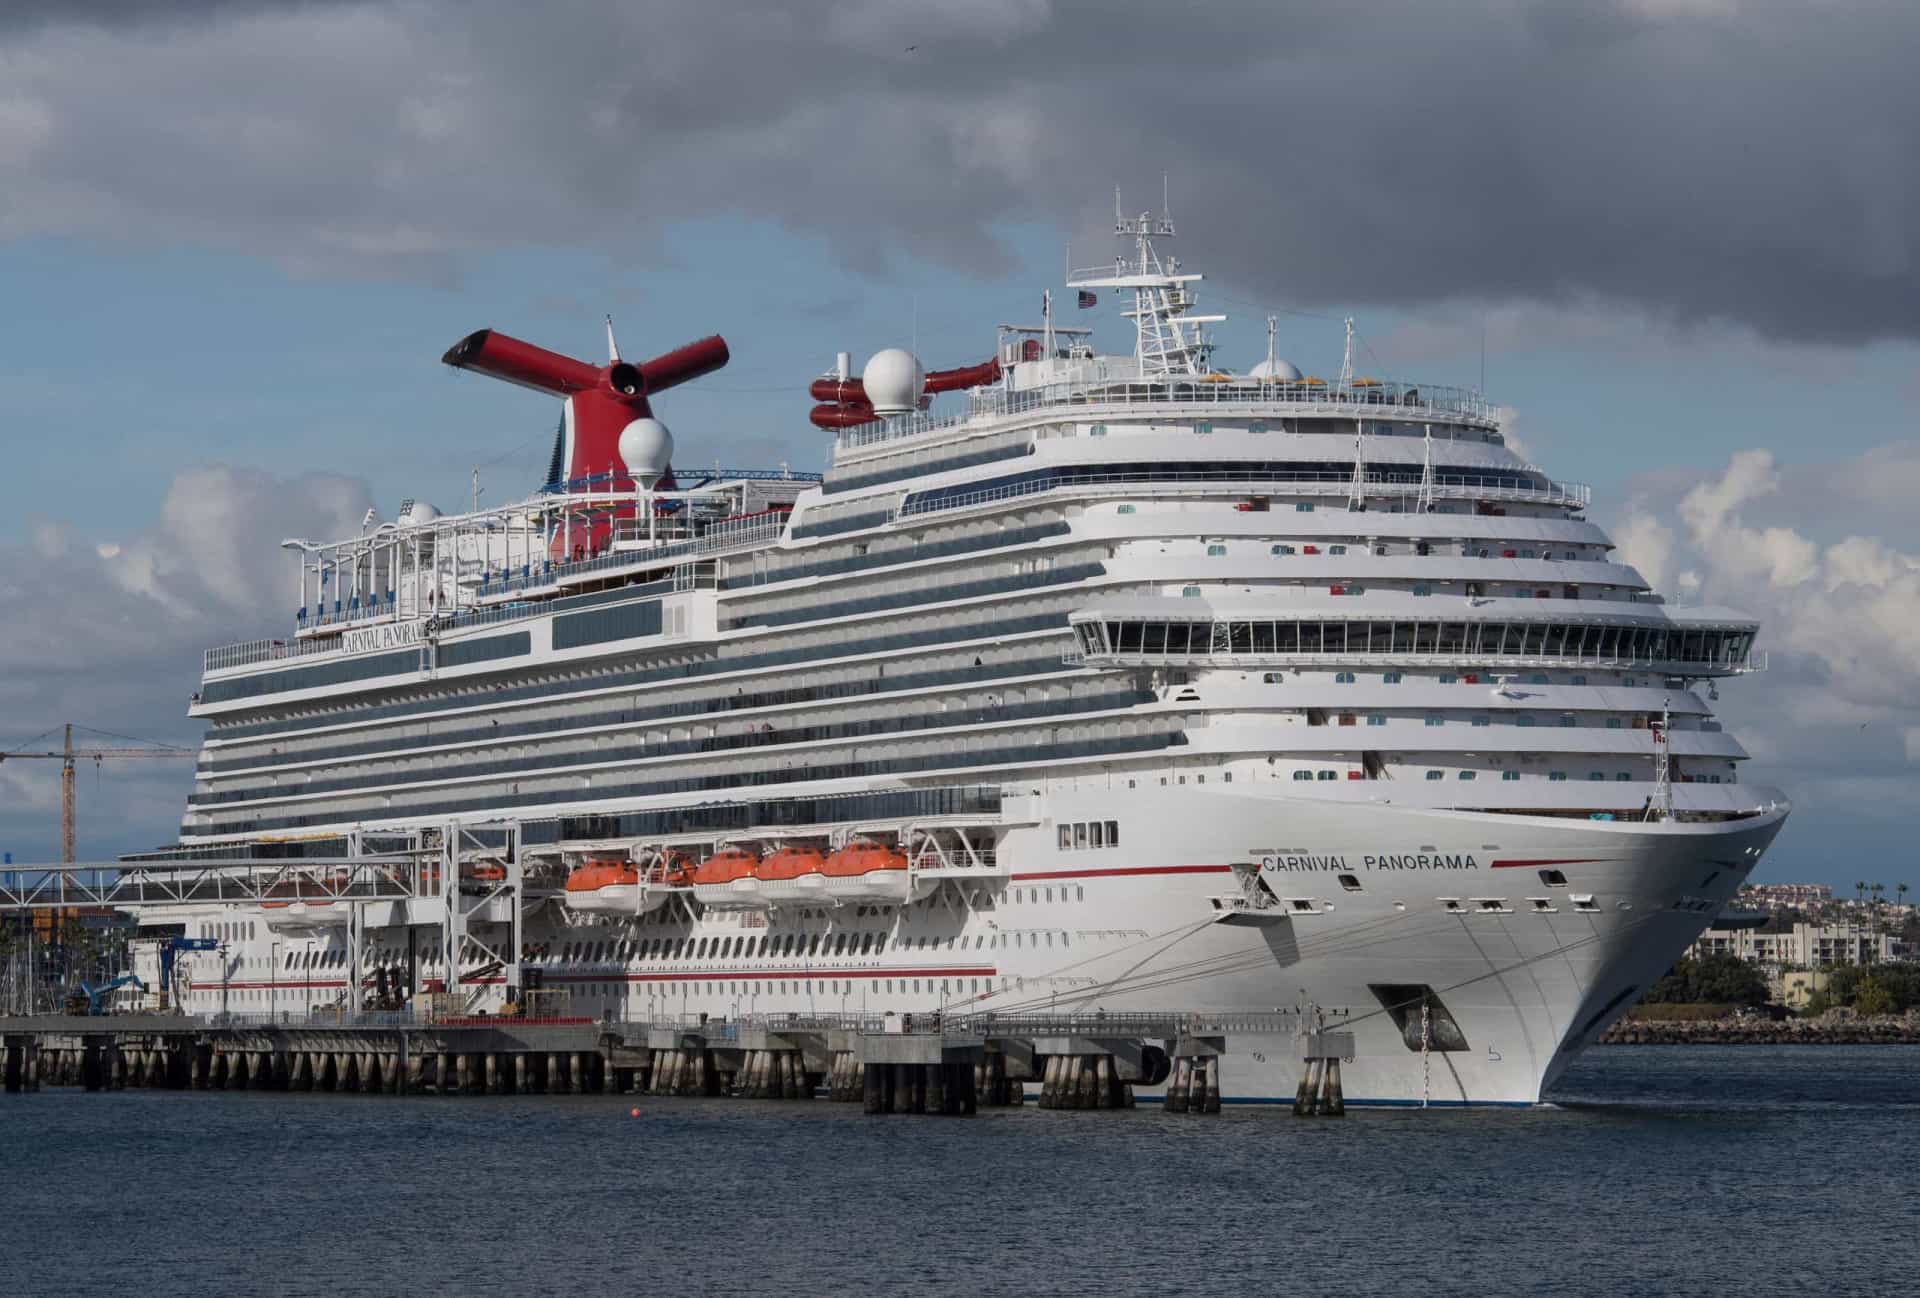 <p>In the early hours of December 11, passengers of the Carnival Miracle cruise ship, on a three-day voyage from Long Beach Cruise Terminal to Ensenada, were alerted that someone had fallen overboard.</p><p>After over 31 hours of searching, the Coast Guard halted their efforts to find the woman. According to <a href="https://losangeles.cbslocal.com/2021/12/11/coast-guard-searching-for-woman-who-fell-overboard-carnival-cruise/" rel="noreferrer noopener">CBS Los Angeles</a>, many passengers suspect the incident occurred from foul play, after the woman fell from the fifth-floor balcony of her stateroom.</p><p>“Someone has lost their life, whether it was done by accident or by foul play I don’t know,” said Daniel Miranda, a Northern California firefighter paramedic onboard the ship. “There’s some high suspicion of foul play.” He estimated  estimated around 1,100 were on board at the time of the incident, however, so the investigation is a huge undertaking.</p><p>Cruise ships regularly lose passengers, even crew members, and continue on their trip unless ordered to stop by the local coast guard. But often the coast guard won't be notified until hours after the person has been reported missing.</p><p>Think about it this way: cruise ships are full of thousands of people, many of whom are intoxicated, and no police are anywhere to be found. While security exists, they answer to the cruise ship company, which is focused on maximizing profits.</p><p>Have a look at some of the stories behind how people went missing on cruise ships and were never to be found again.</p>